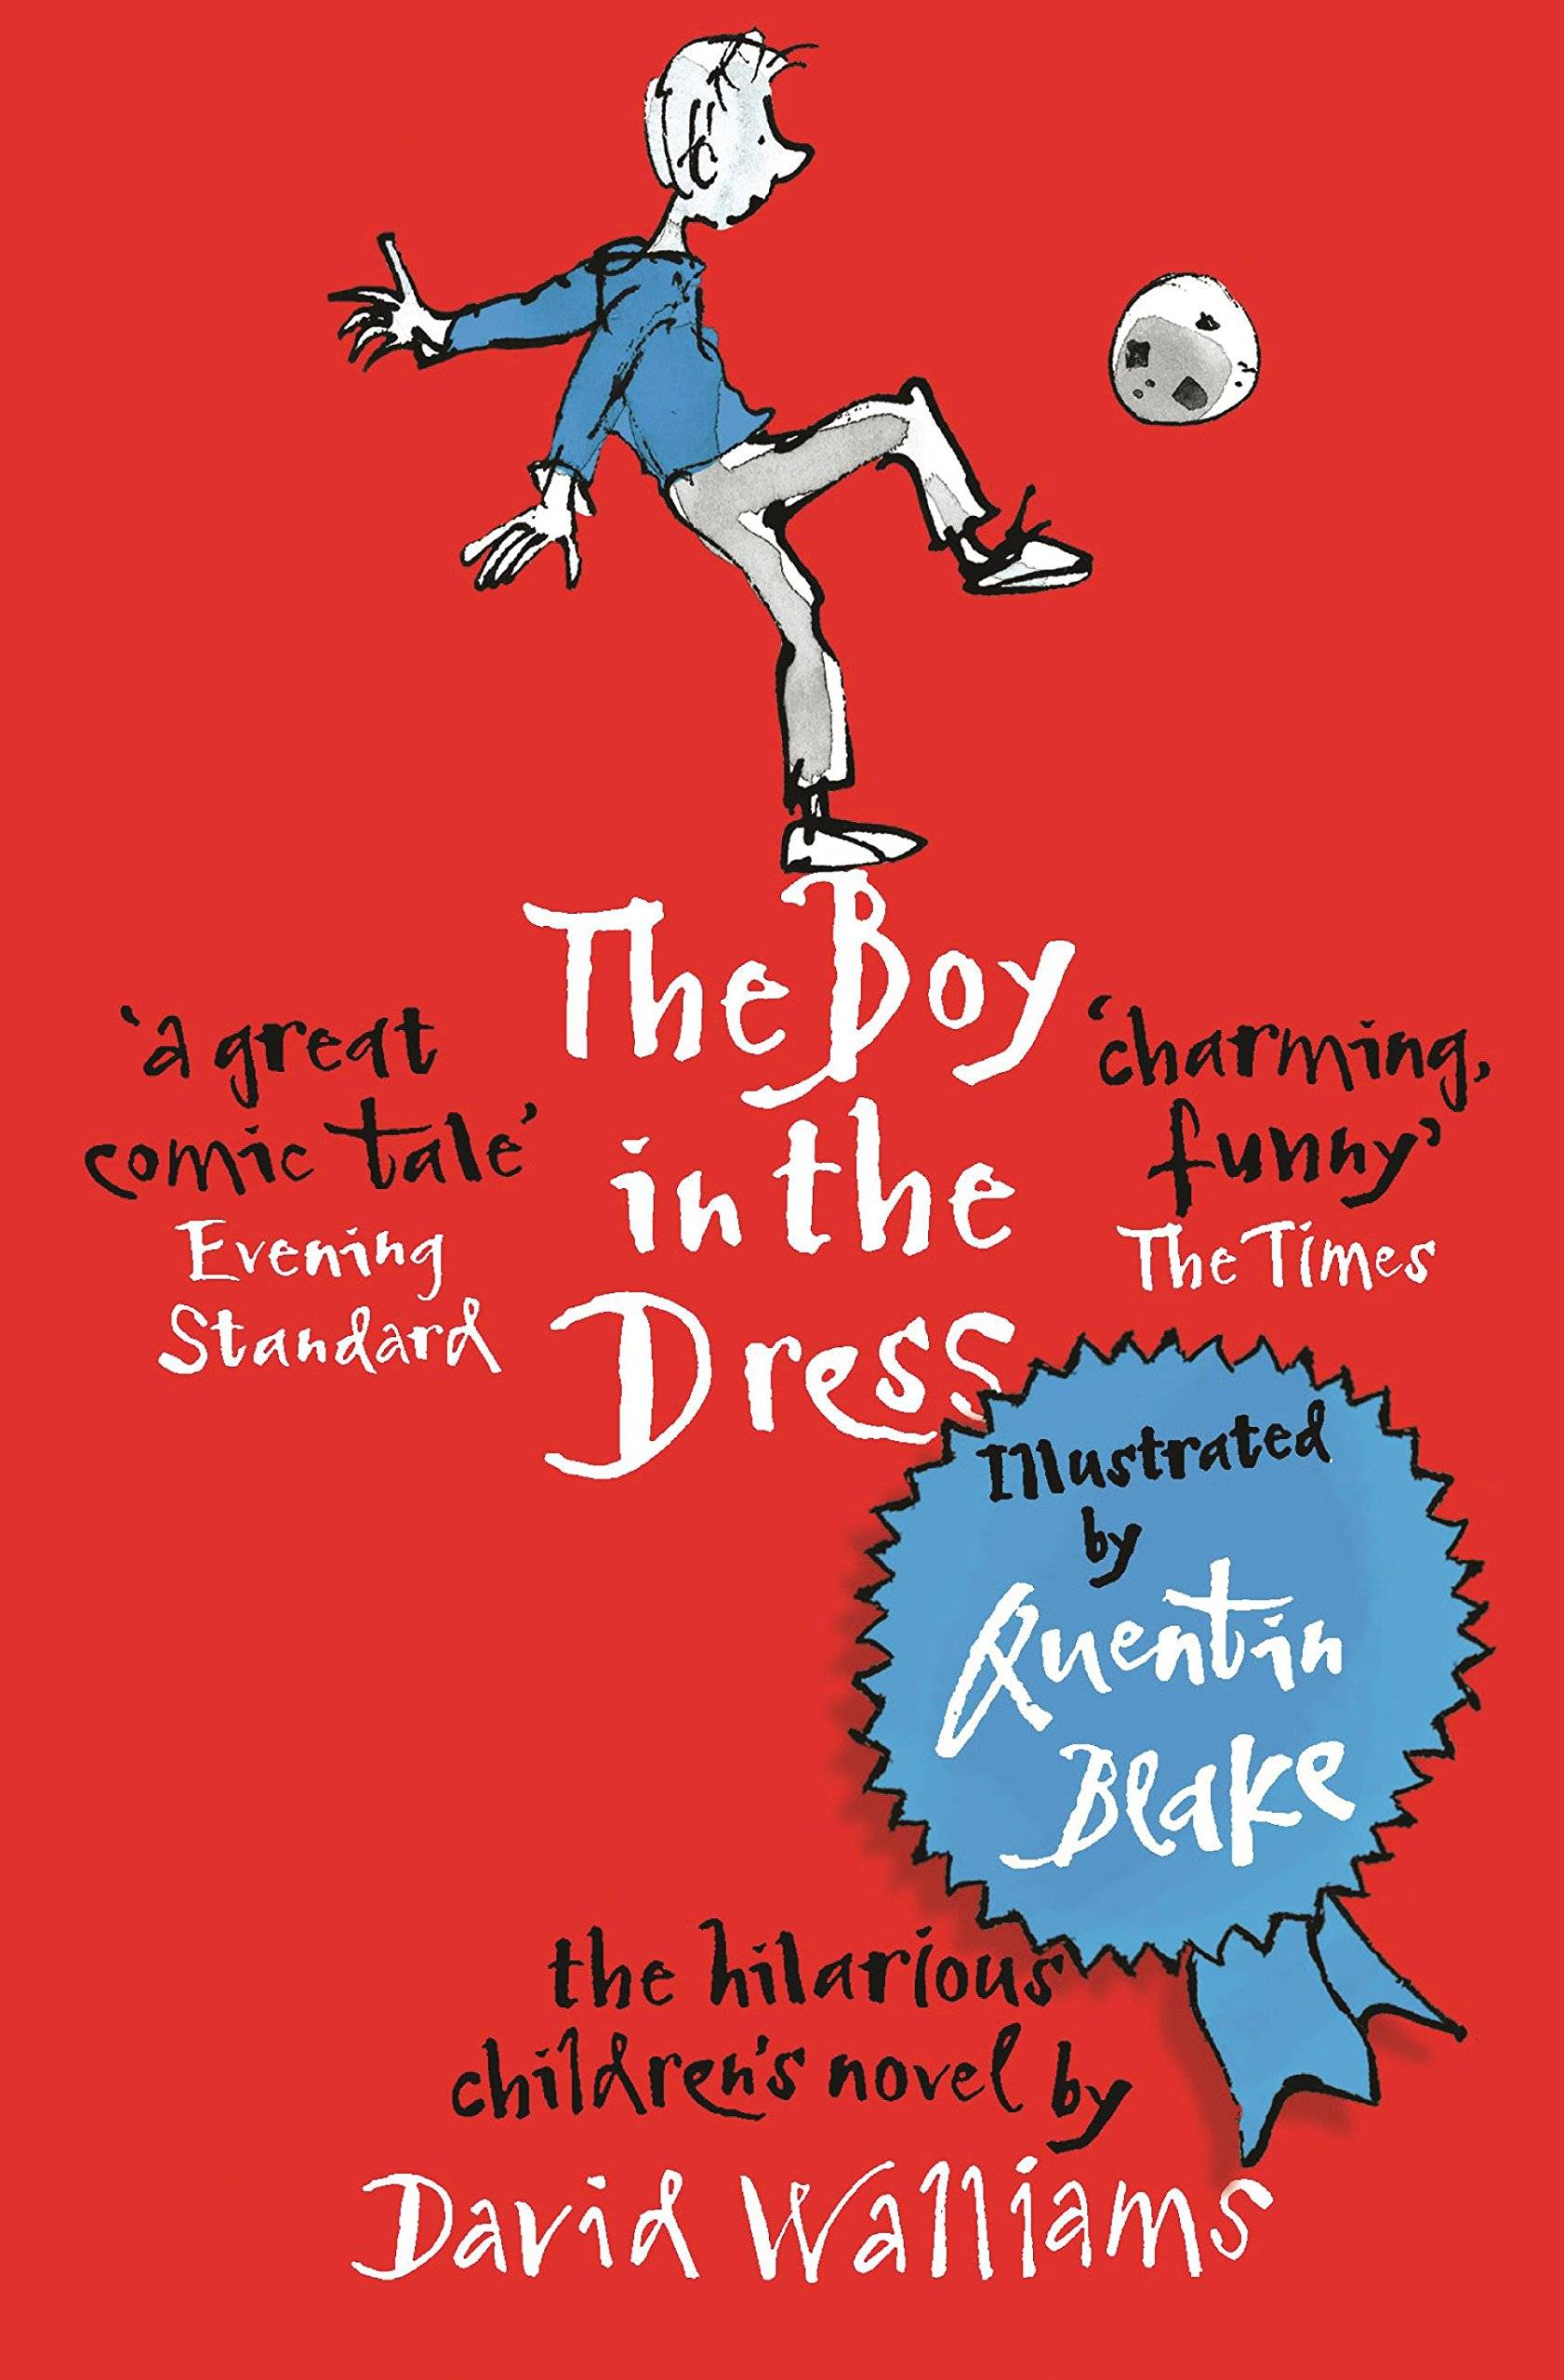 IMG : The boy in the dress